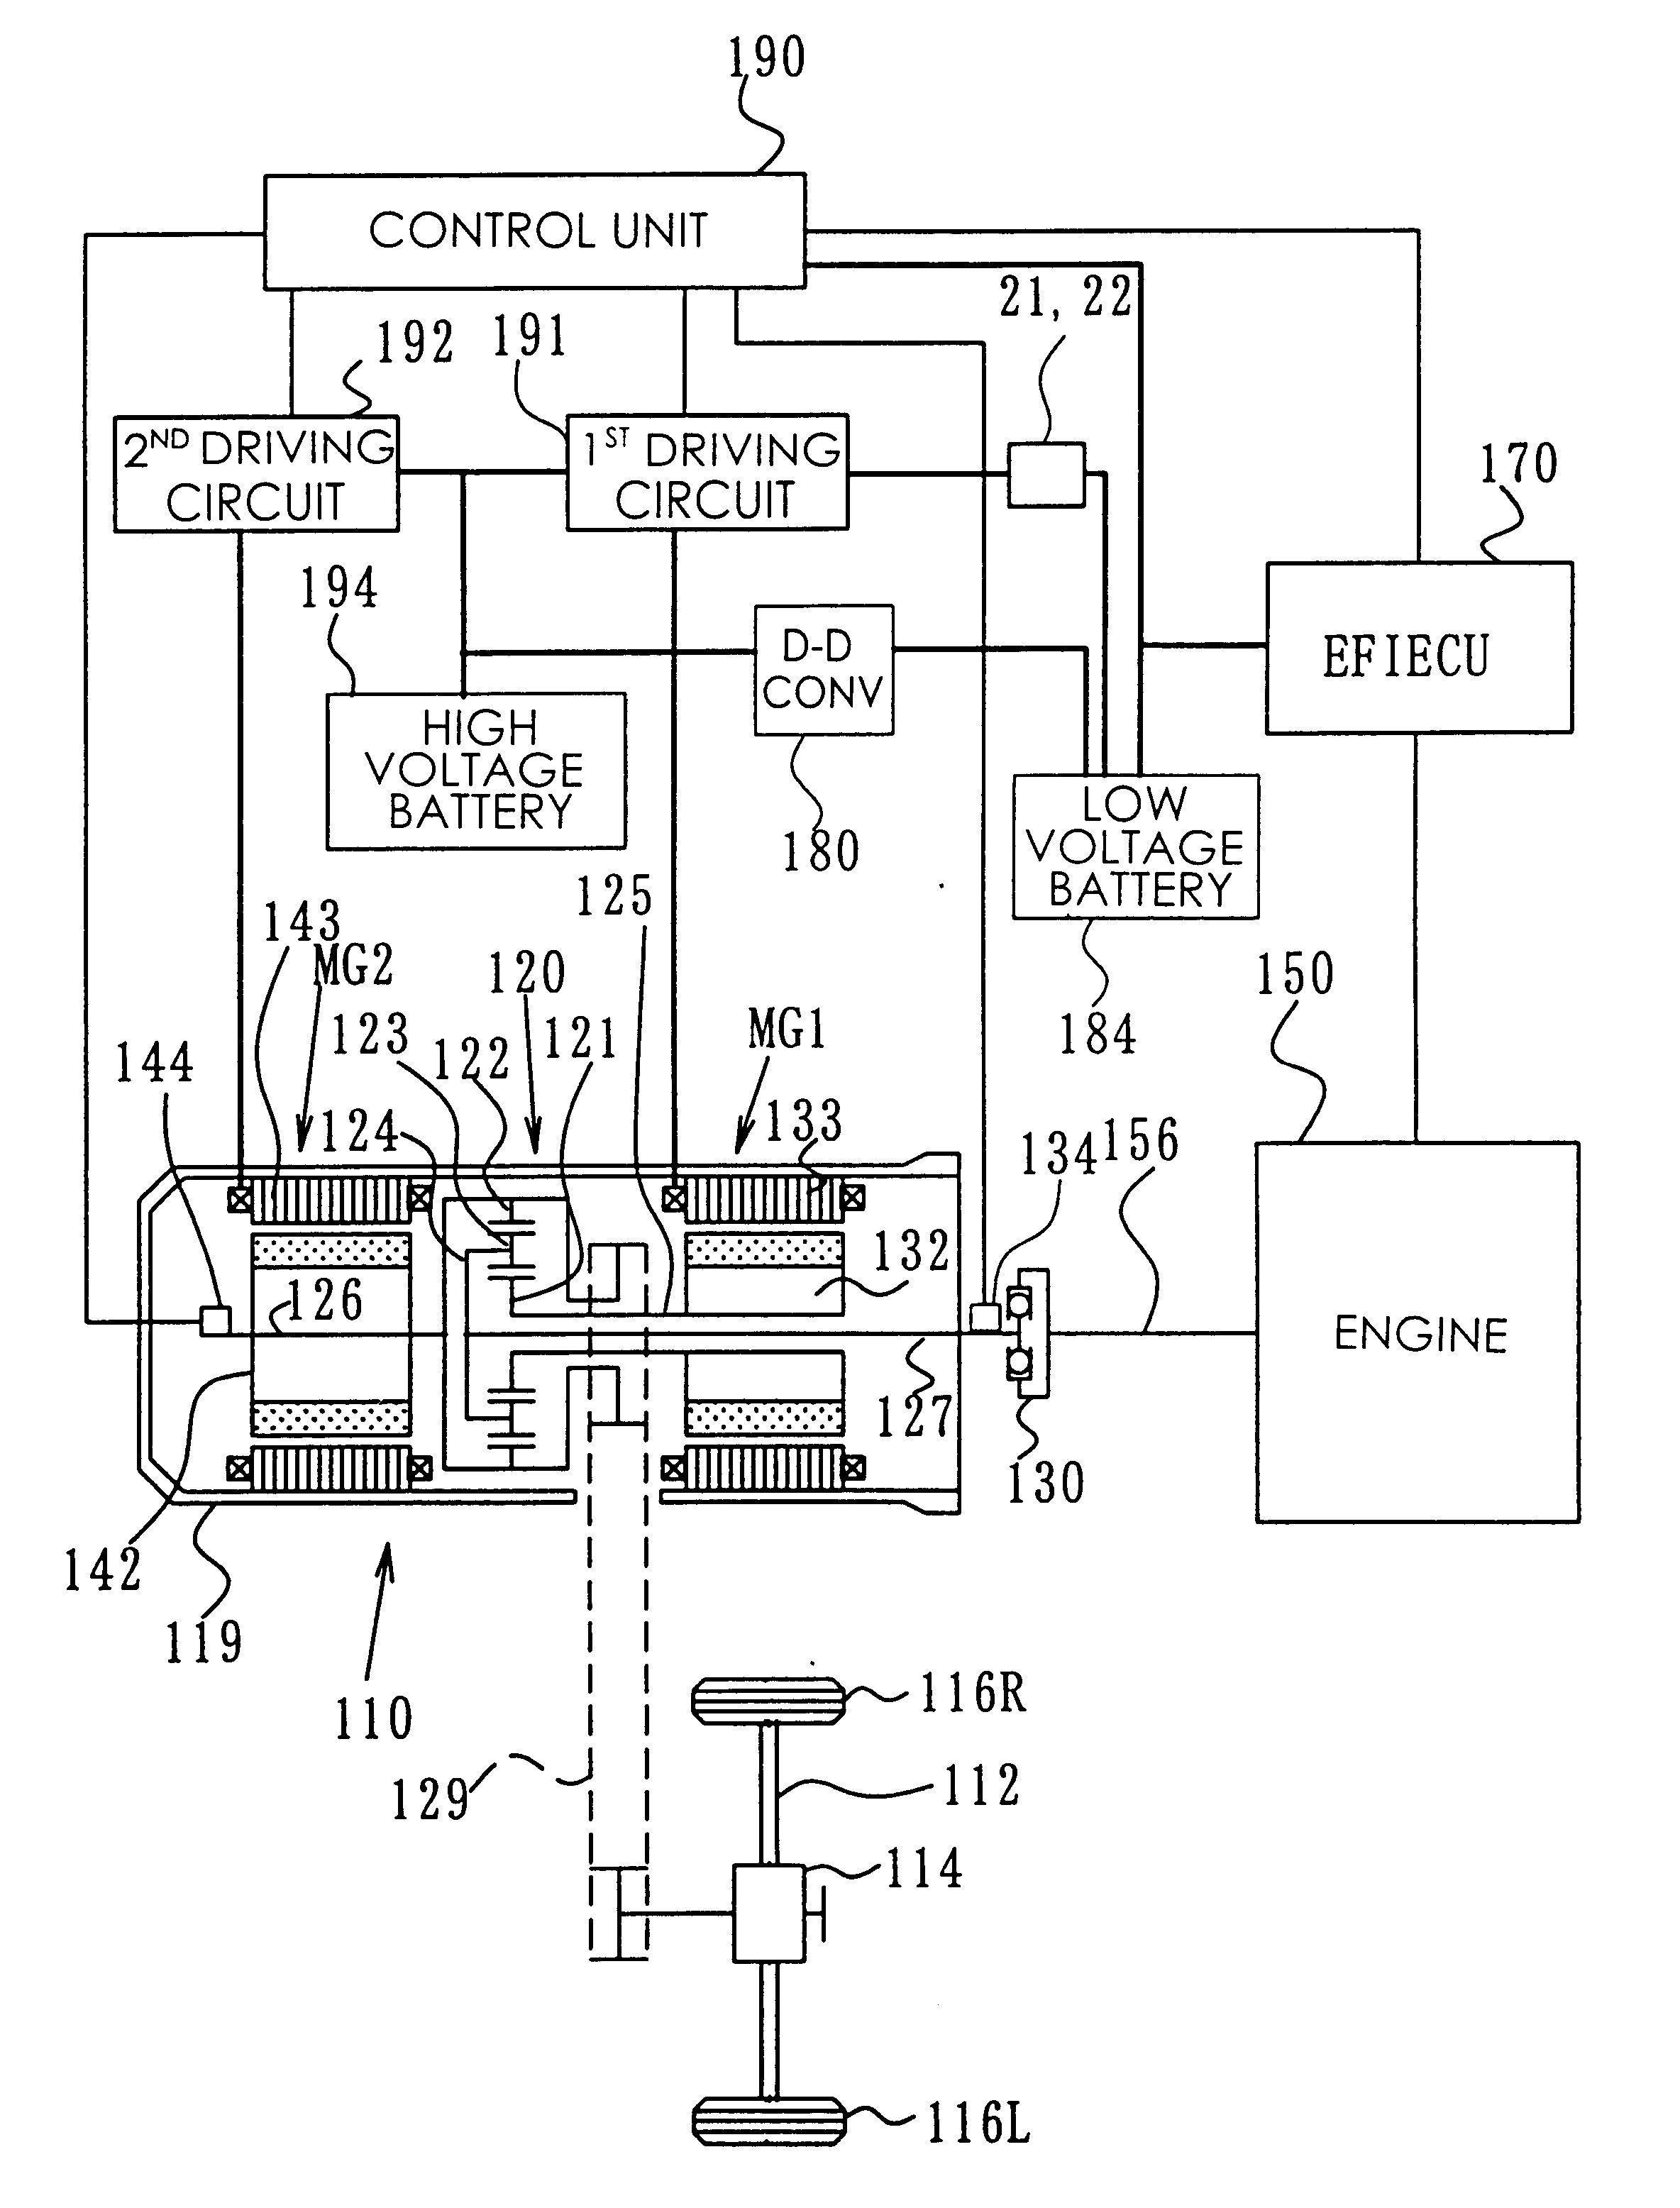 Multiple power source system and apparatus, motor driving apparatus, and hybrid vehicle with multiple power source system mounted thereon